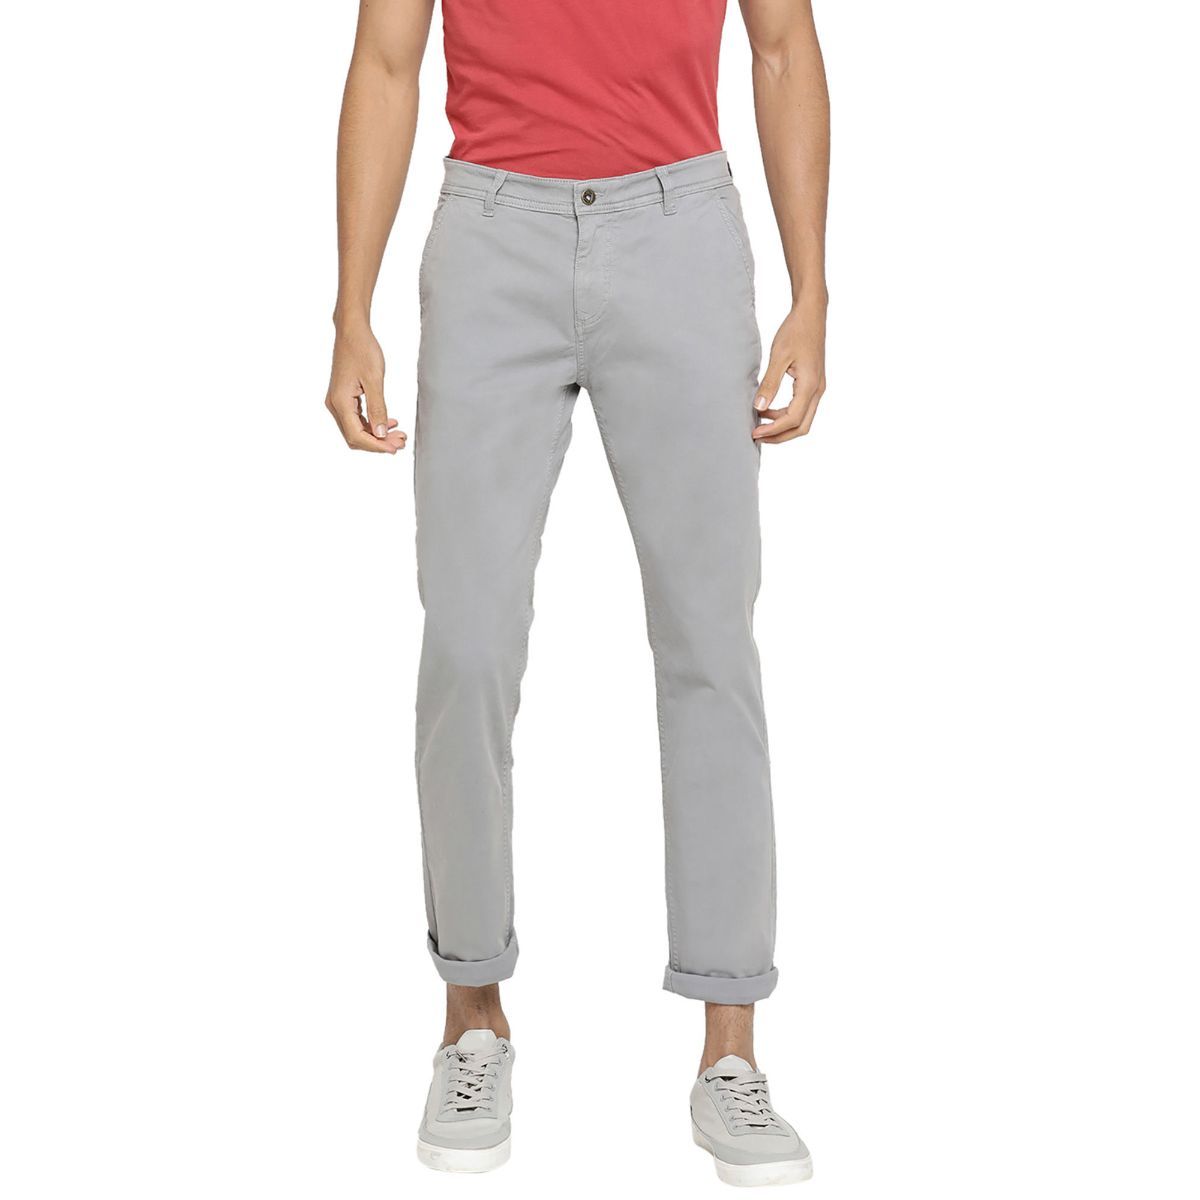 Buy Pepe Jeans Men's Slim Fit Cotton Casual Trousers (PIMW100208_Stone_30W  x 34L) at Amazon.in